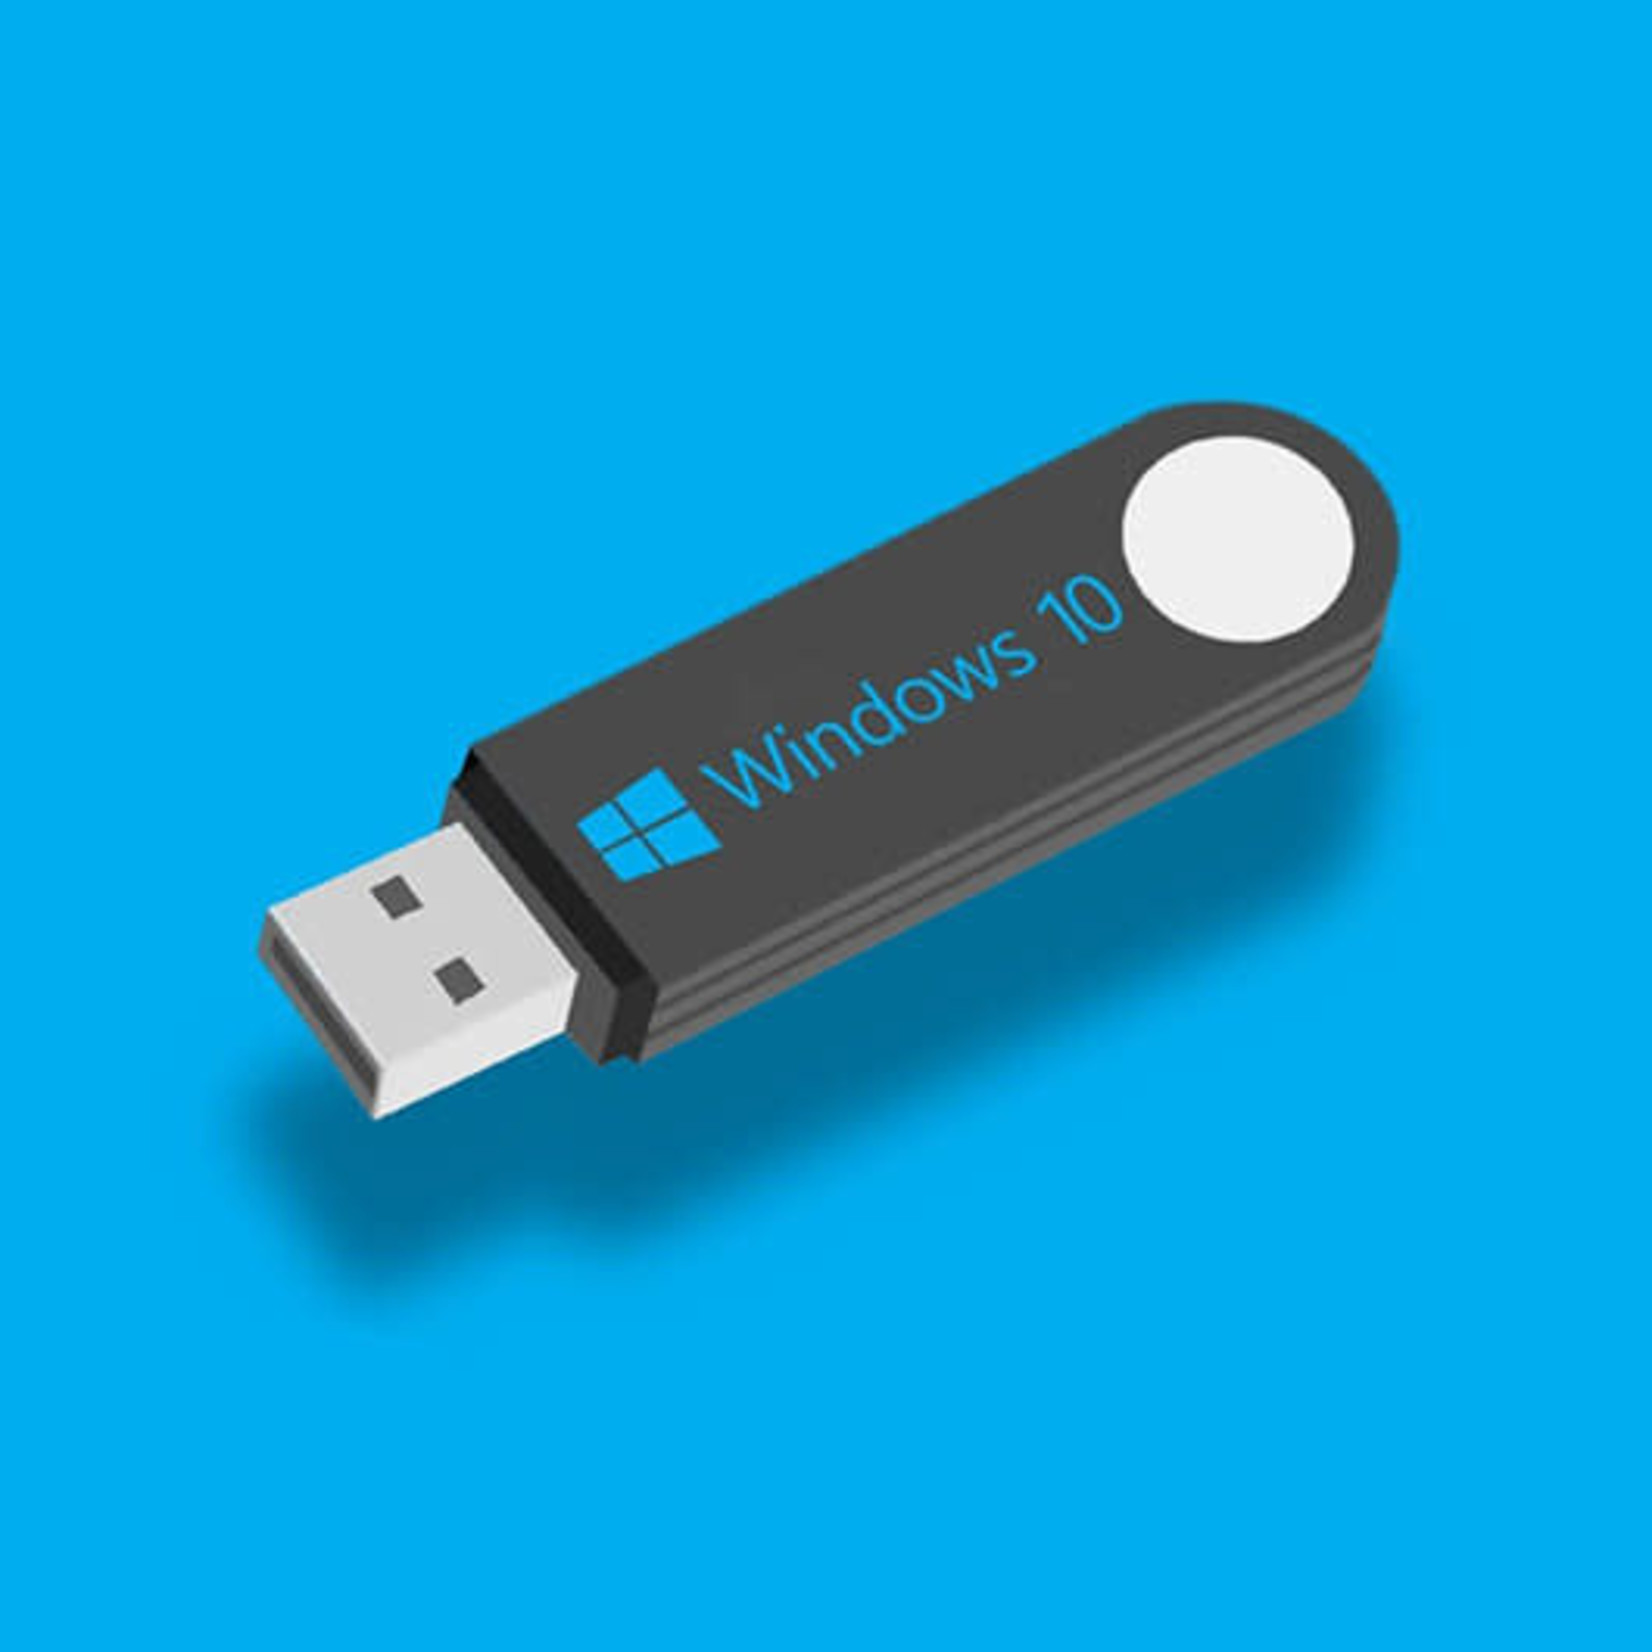 MICROSOFT WINDOWS 10 HOME ACTIVATED USB